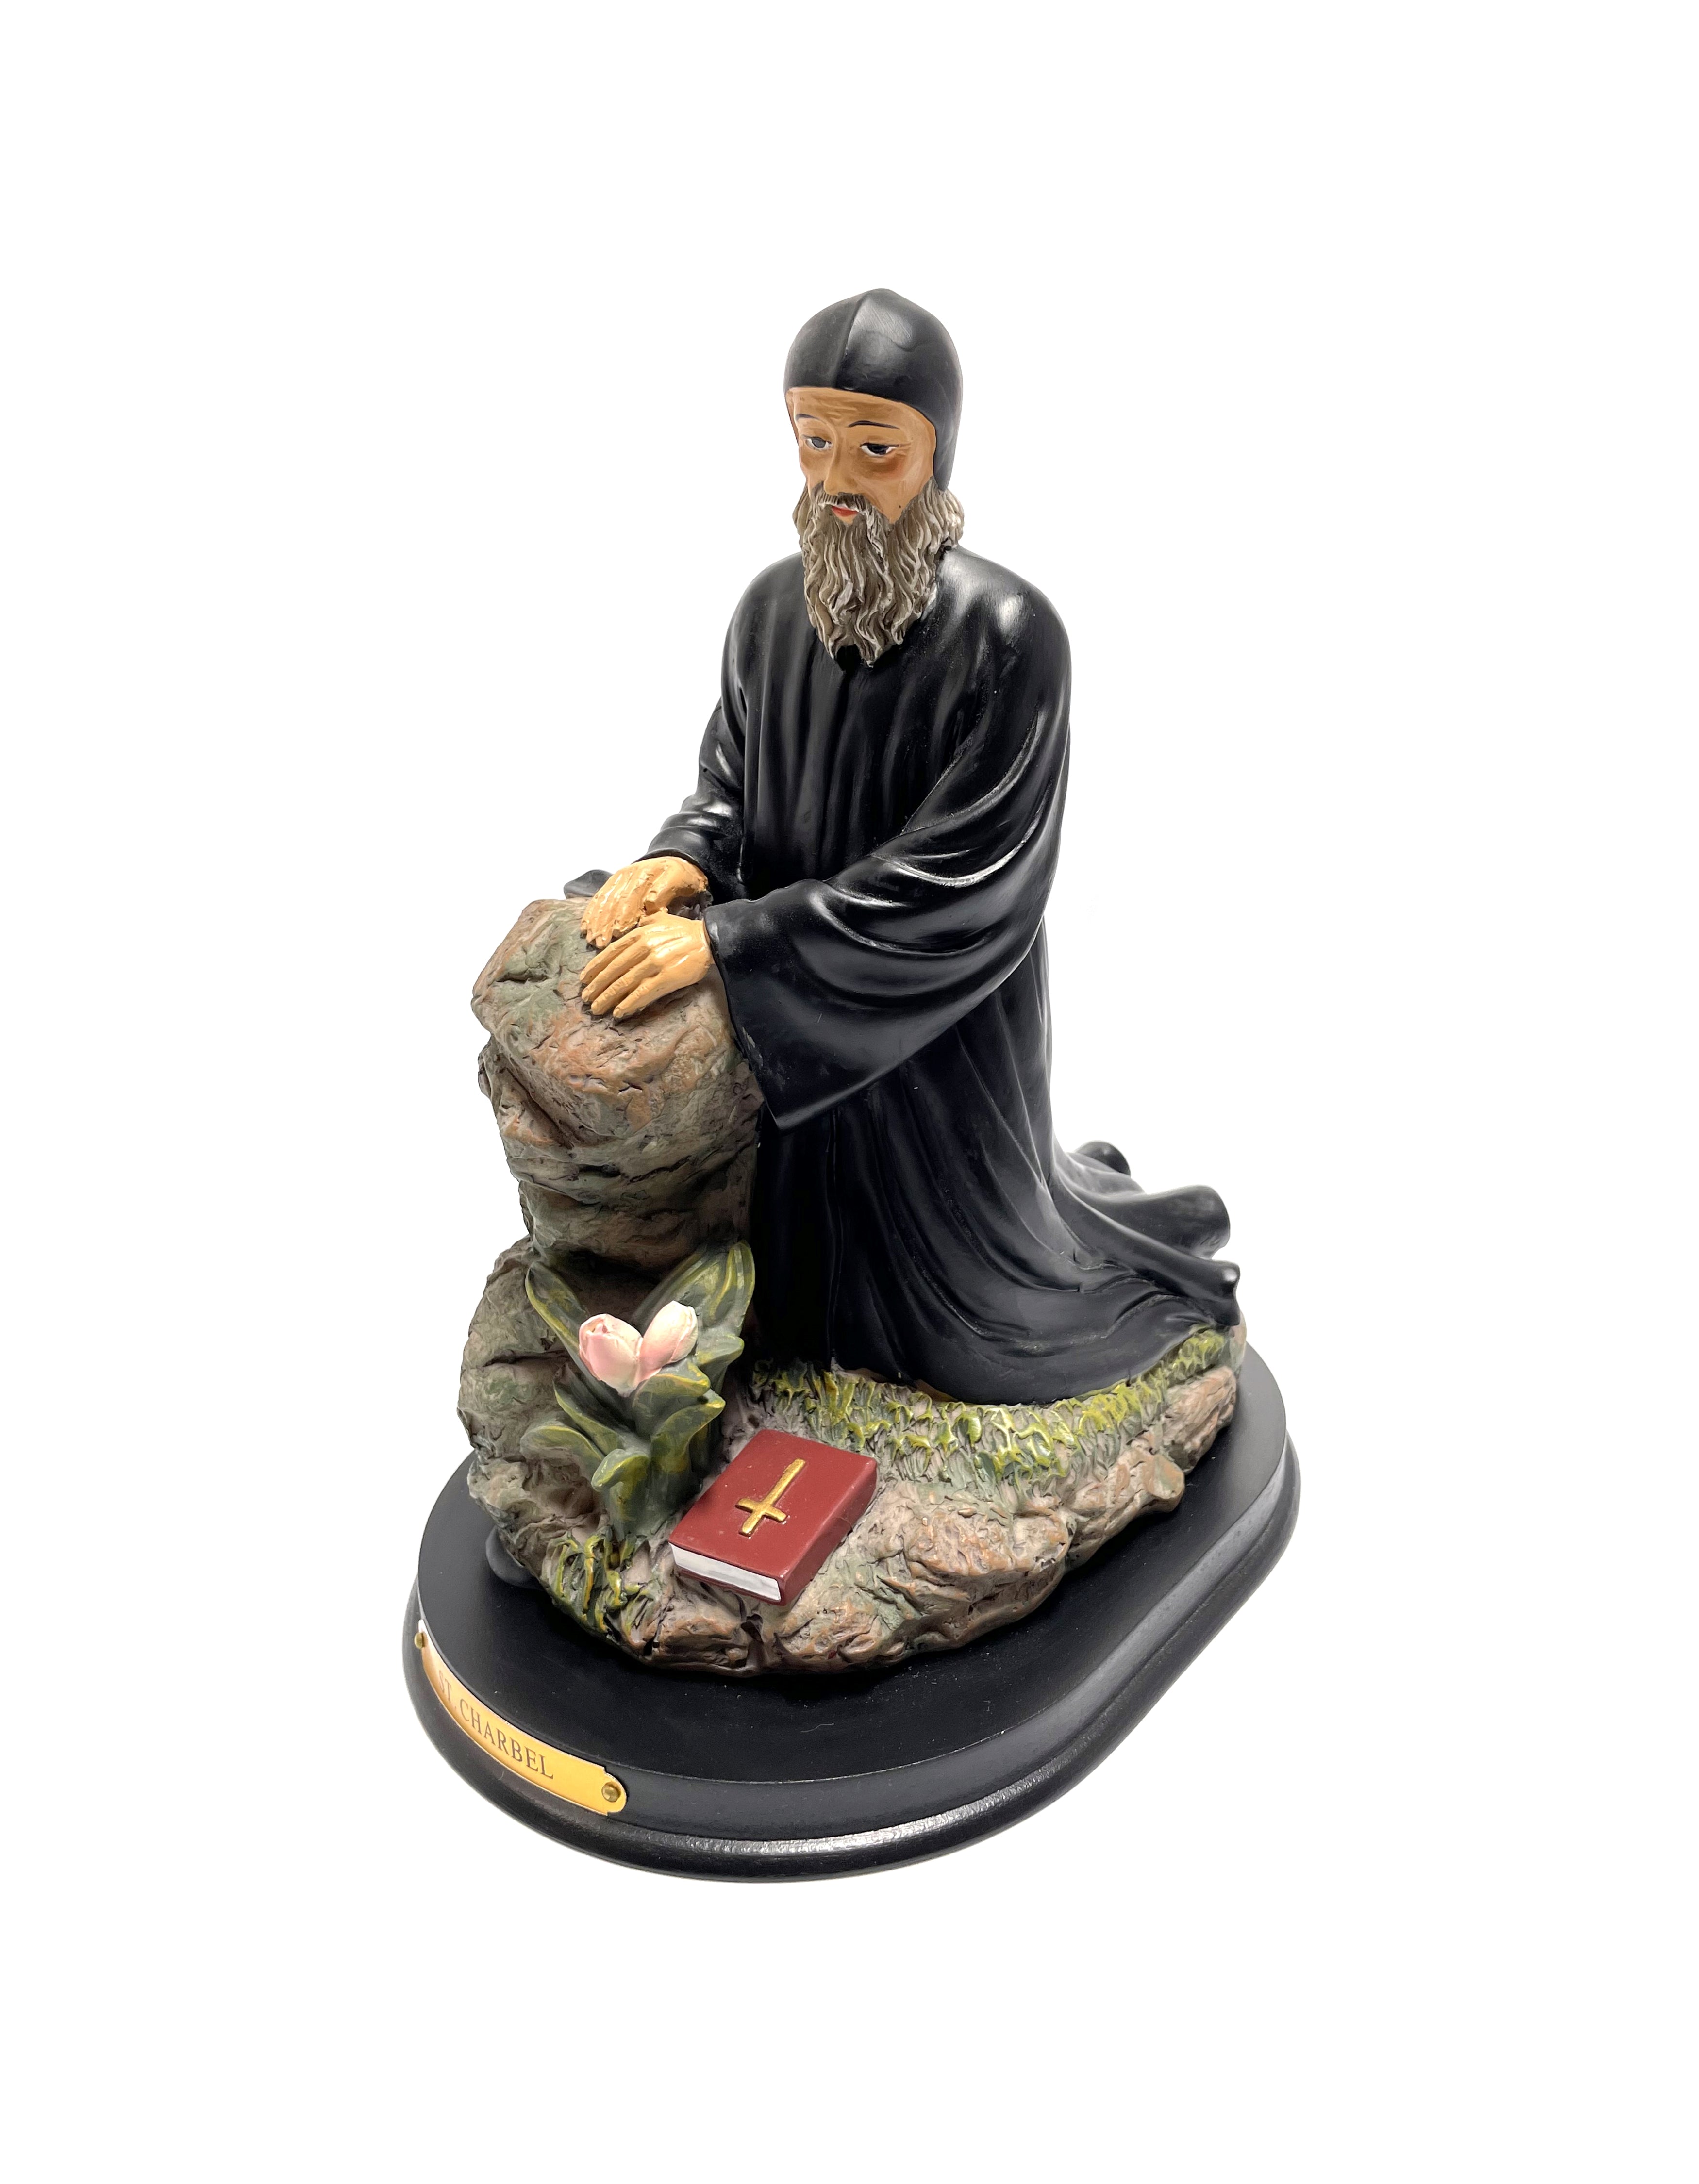 Religious statue of Saint Charbel 10" height